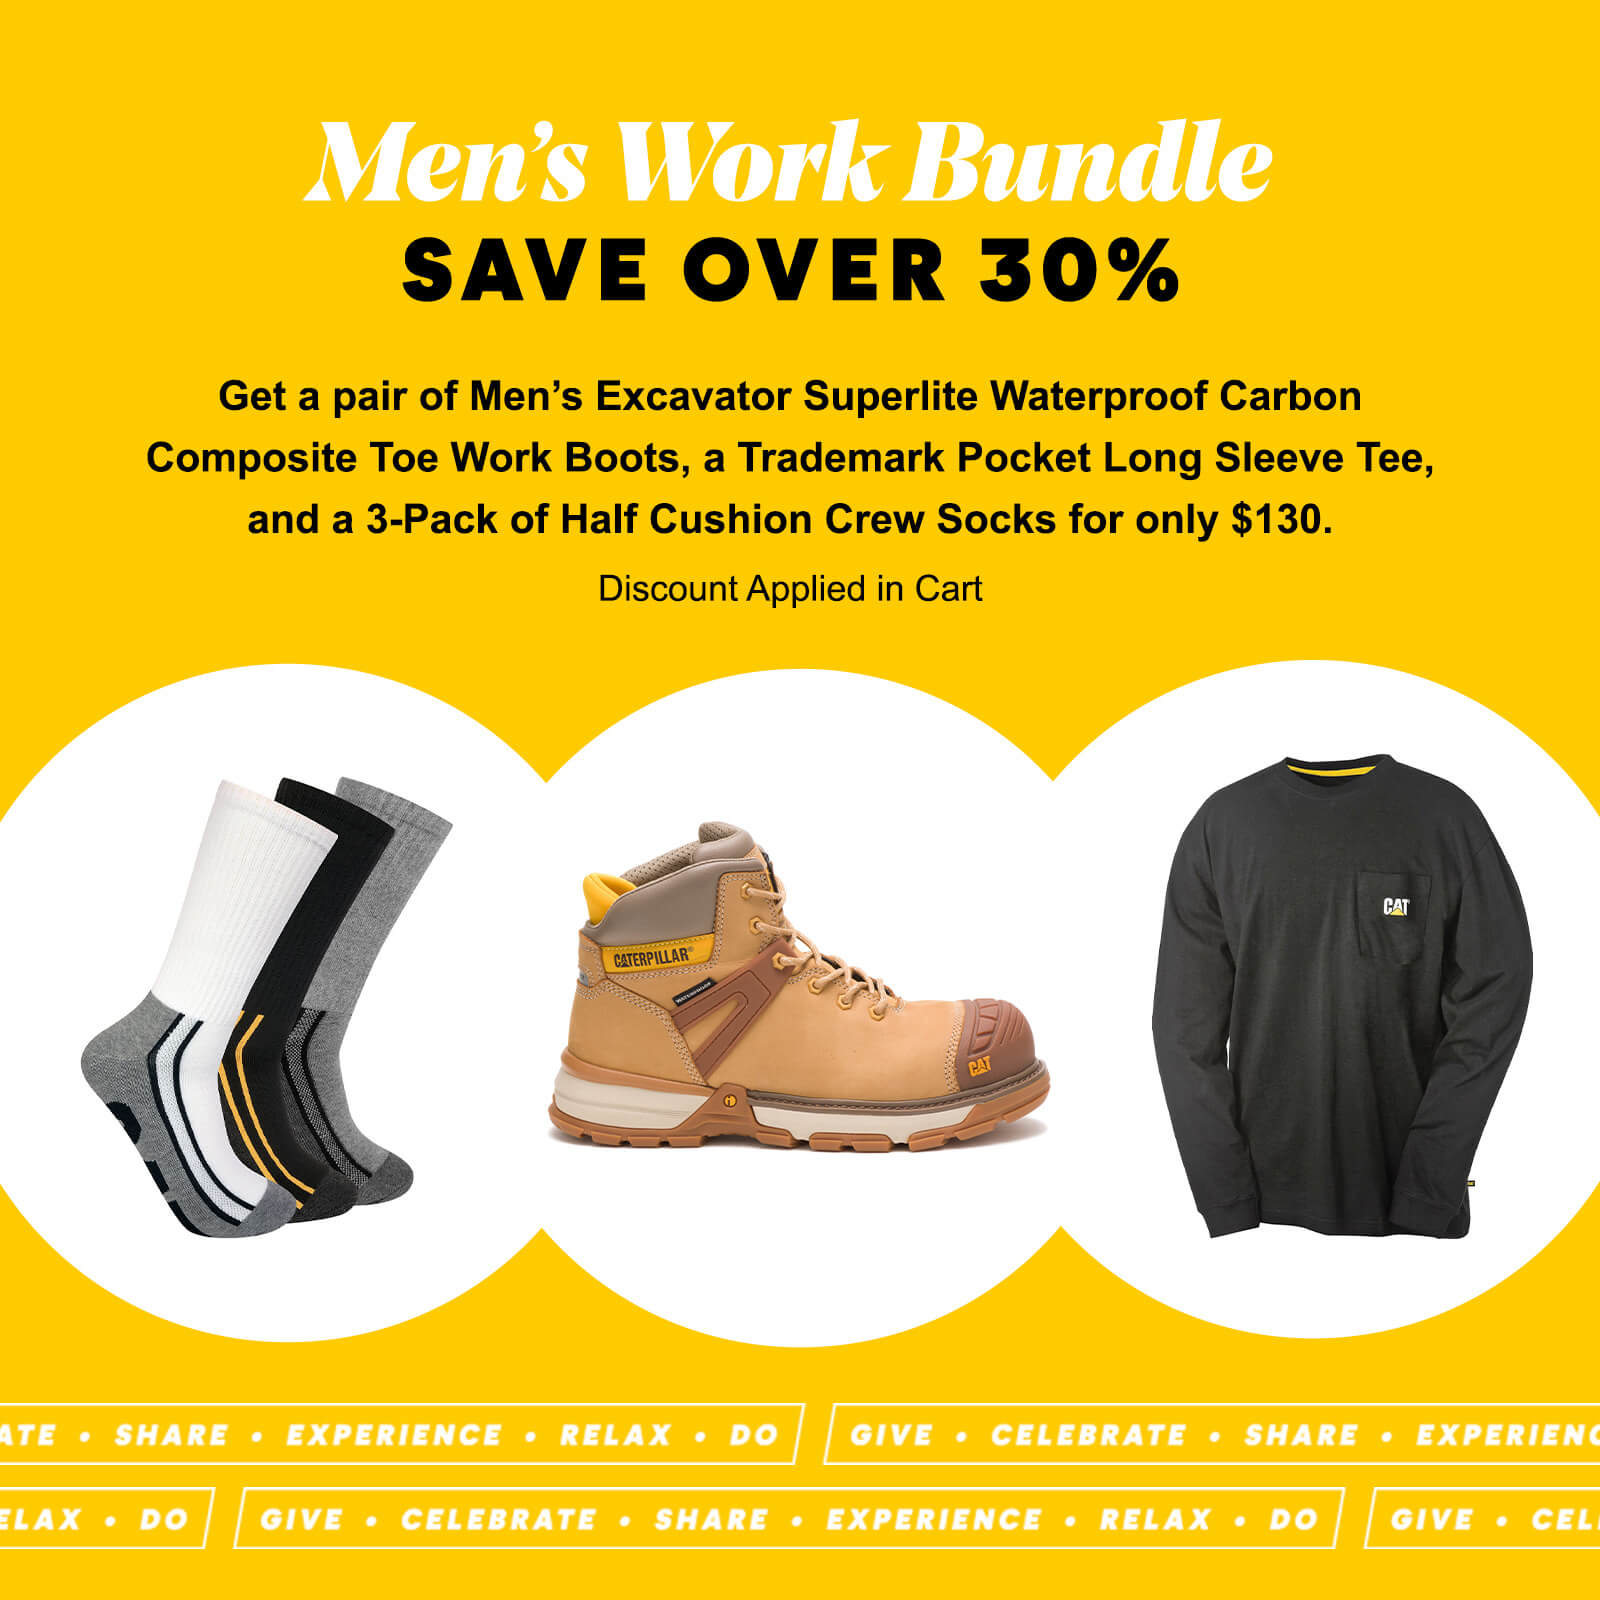 Options from the Men's Work Bundle.